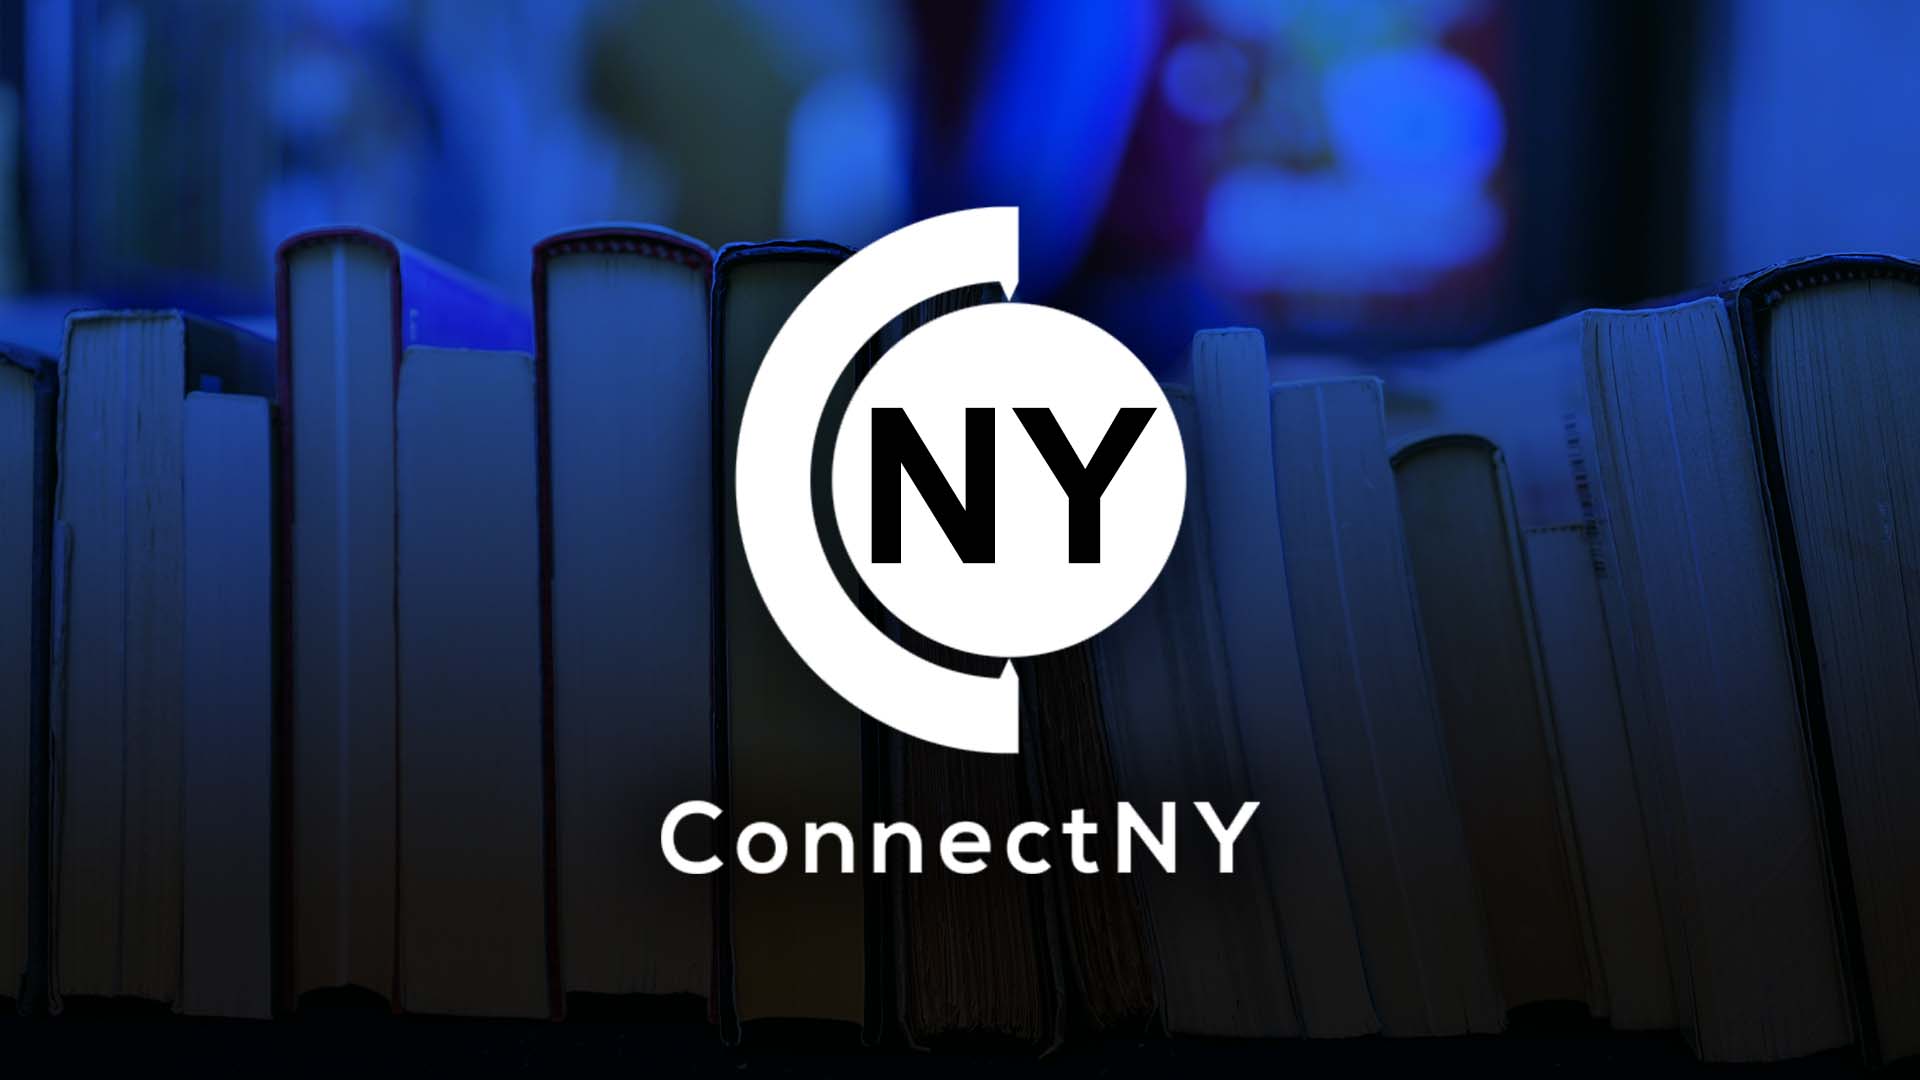 ConnectNY brand on a blue background of books